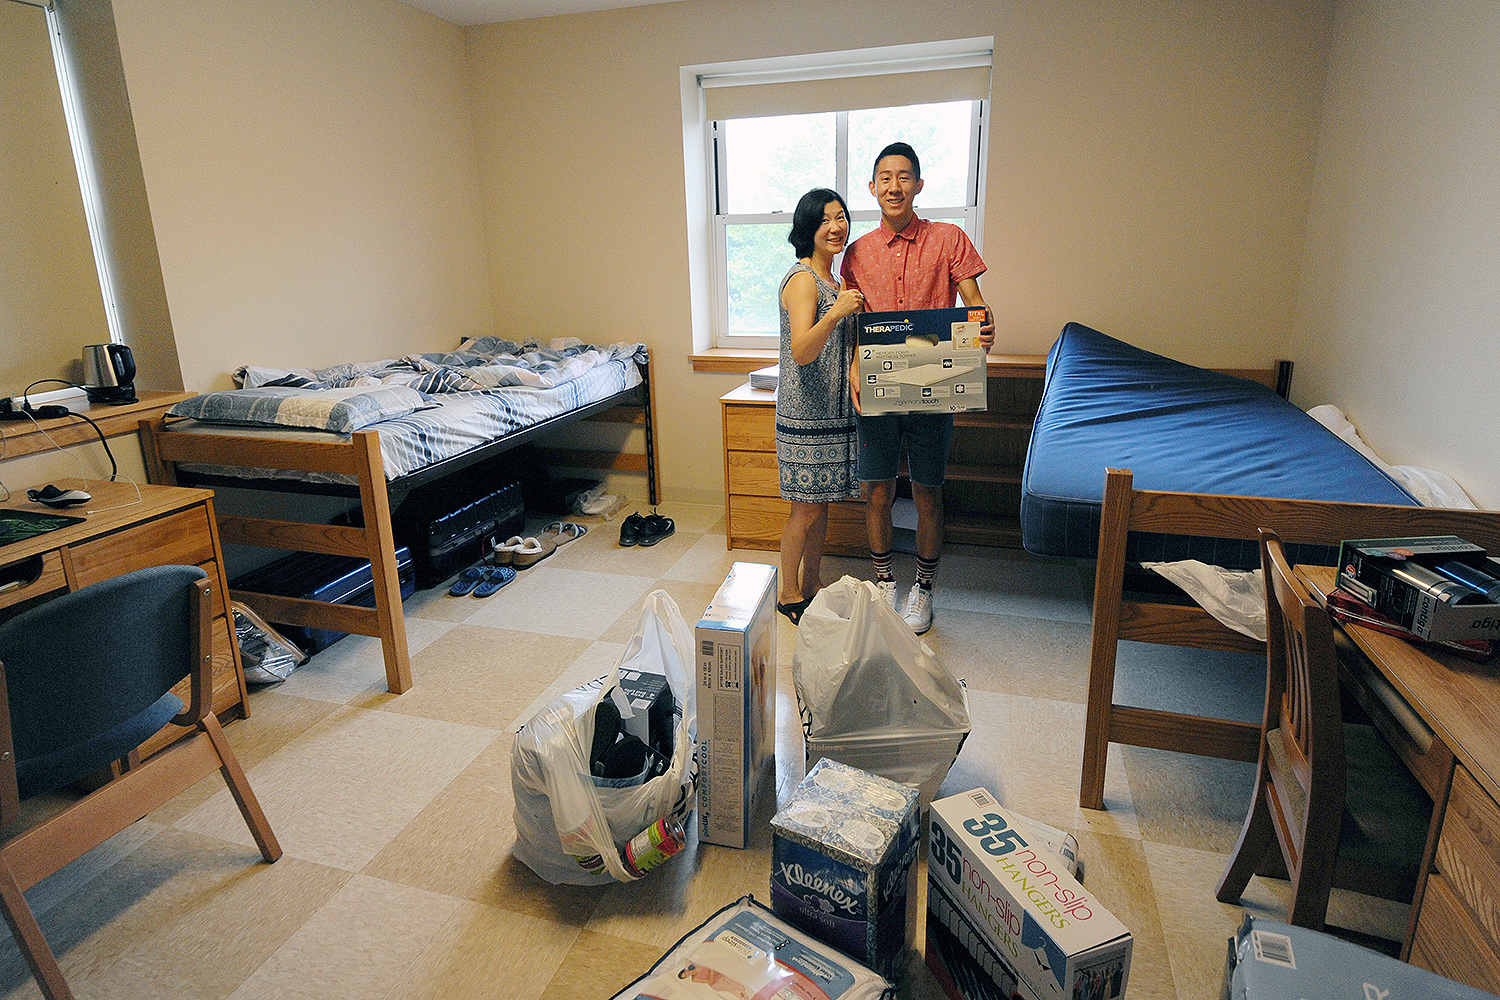 William Wu ’20, from Sammamish, Wash. and his mother, Celia, spent the morning unpacking and decorating William's new room in Bennet Hall. “I really like campus and the general atmosphere,” William said. He’s considering a major in philosophy.